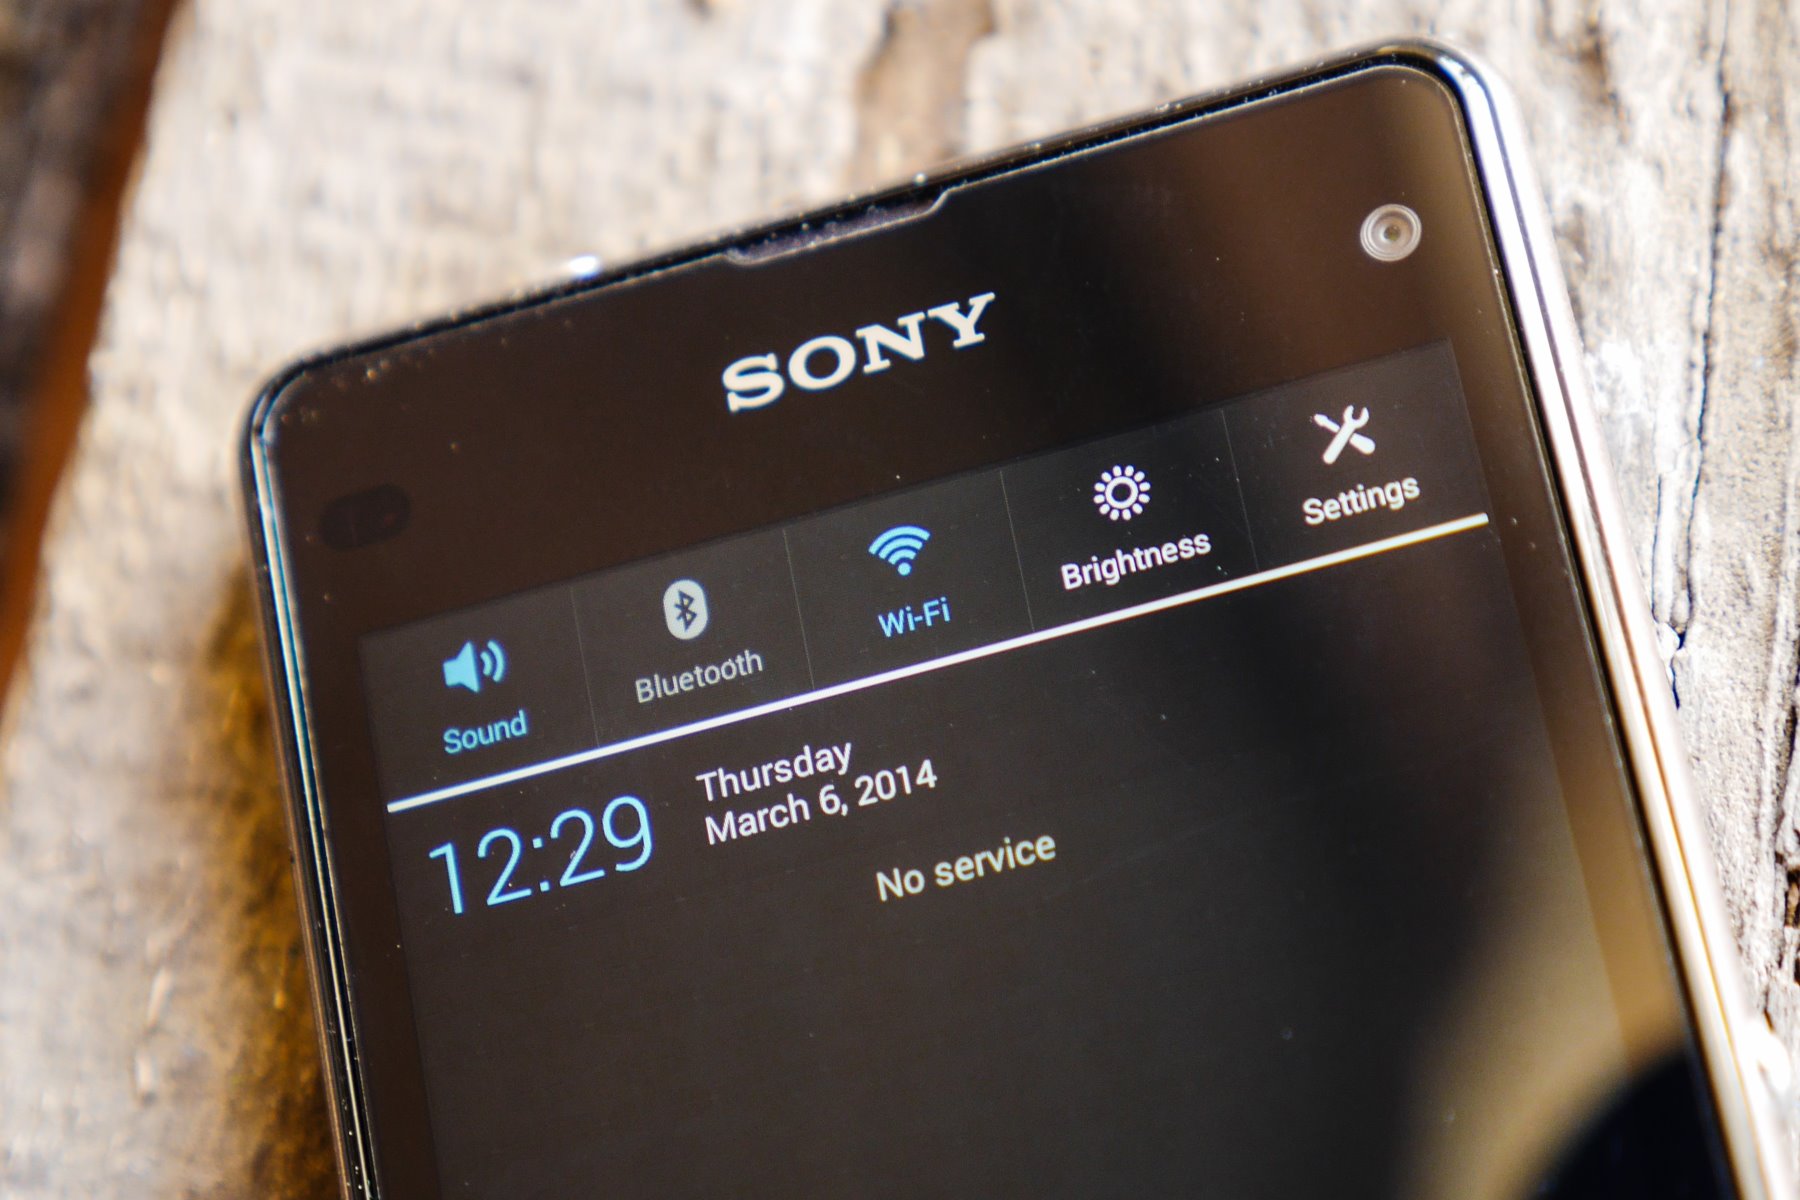 Xperia “No Service” Issue: Troubleshooting And Solutions